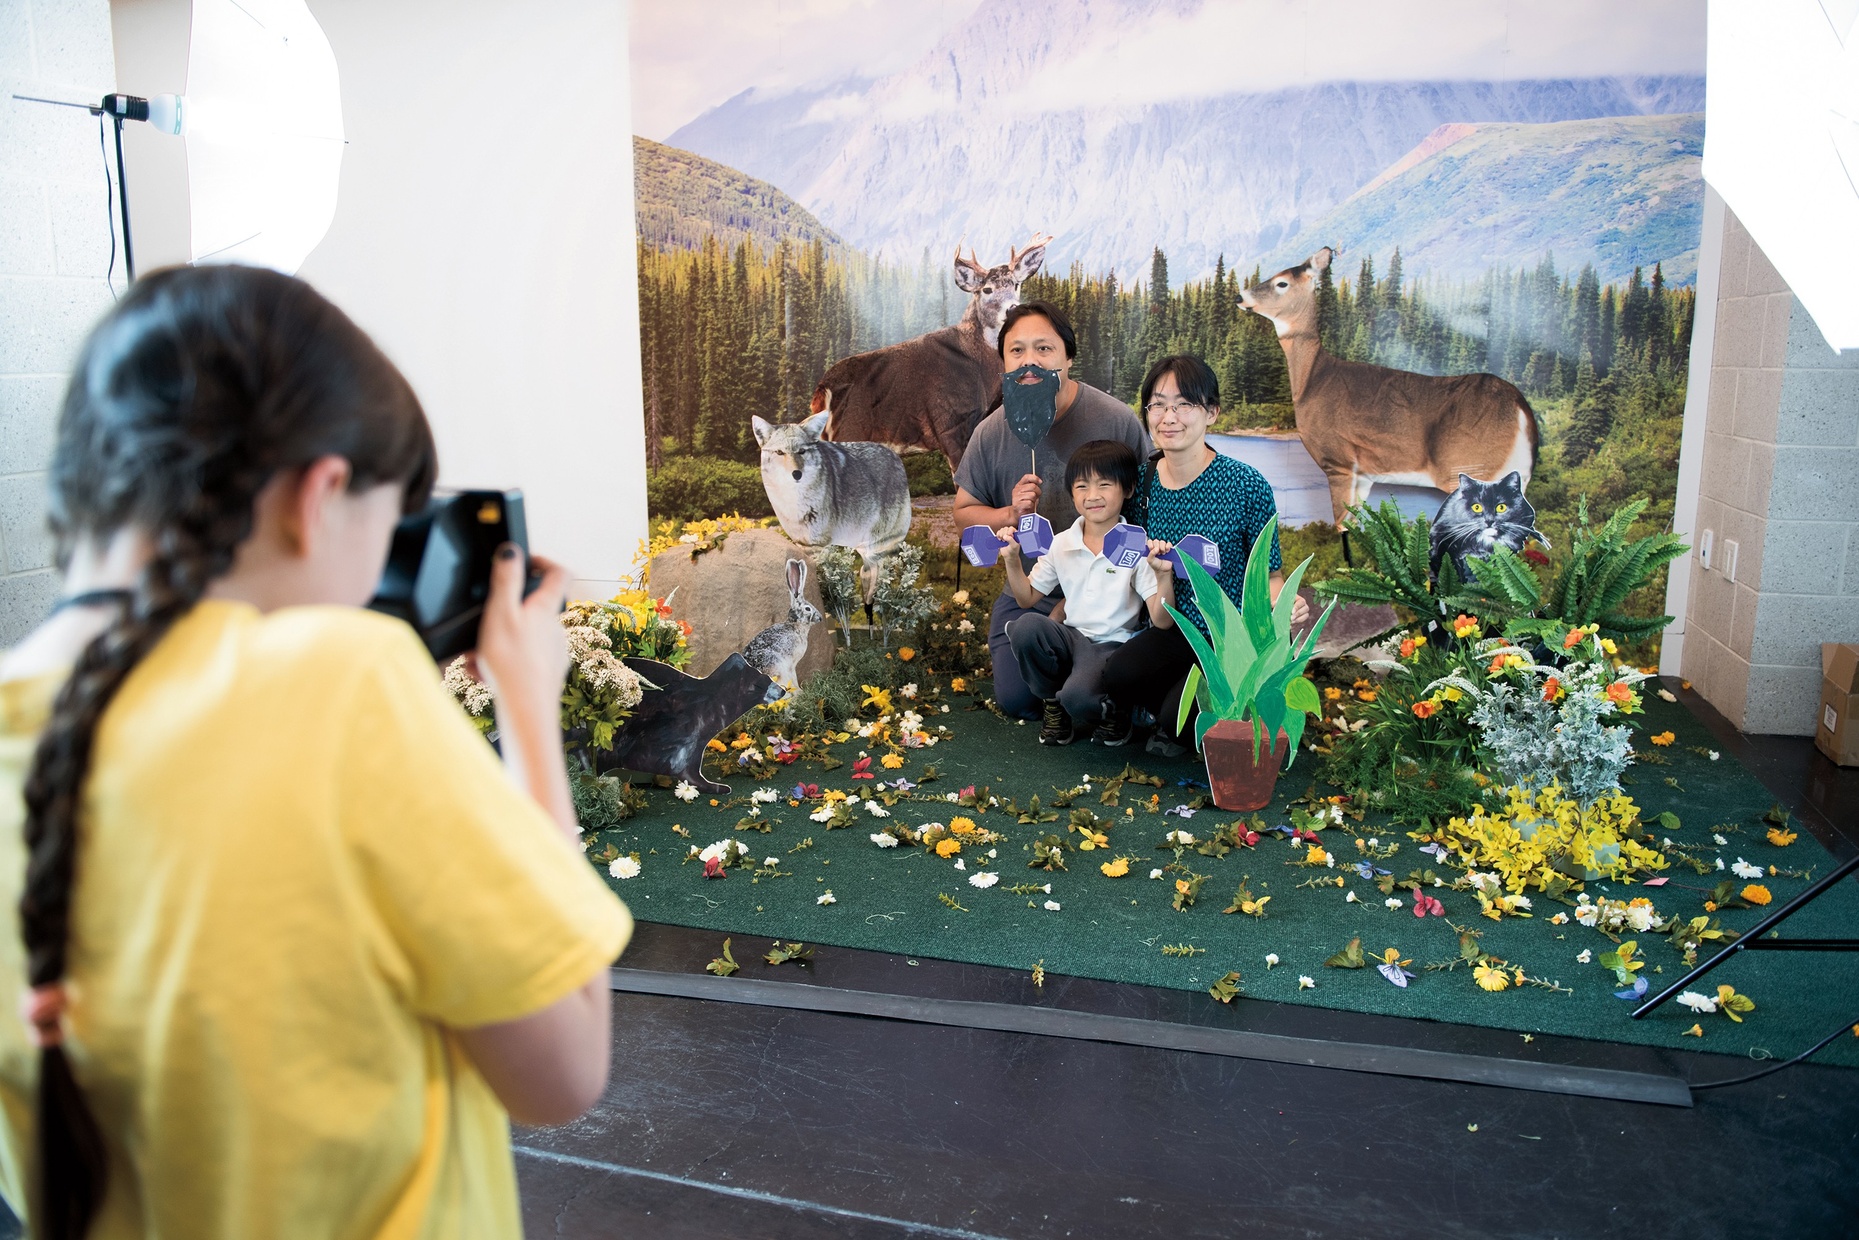 A young, light-skinned girl takes a Polaroid picture of a small, light-skinned family smiling and posing in a fake, nature diorama.